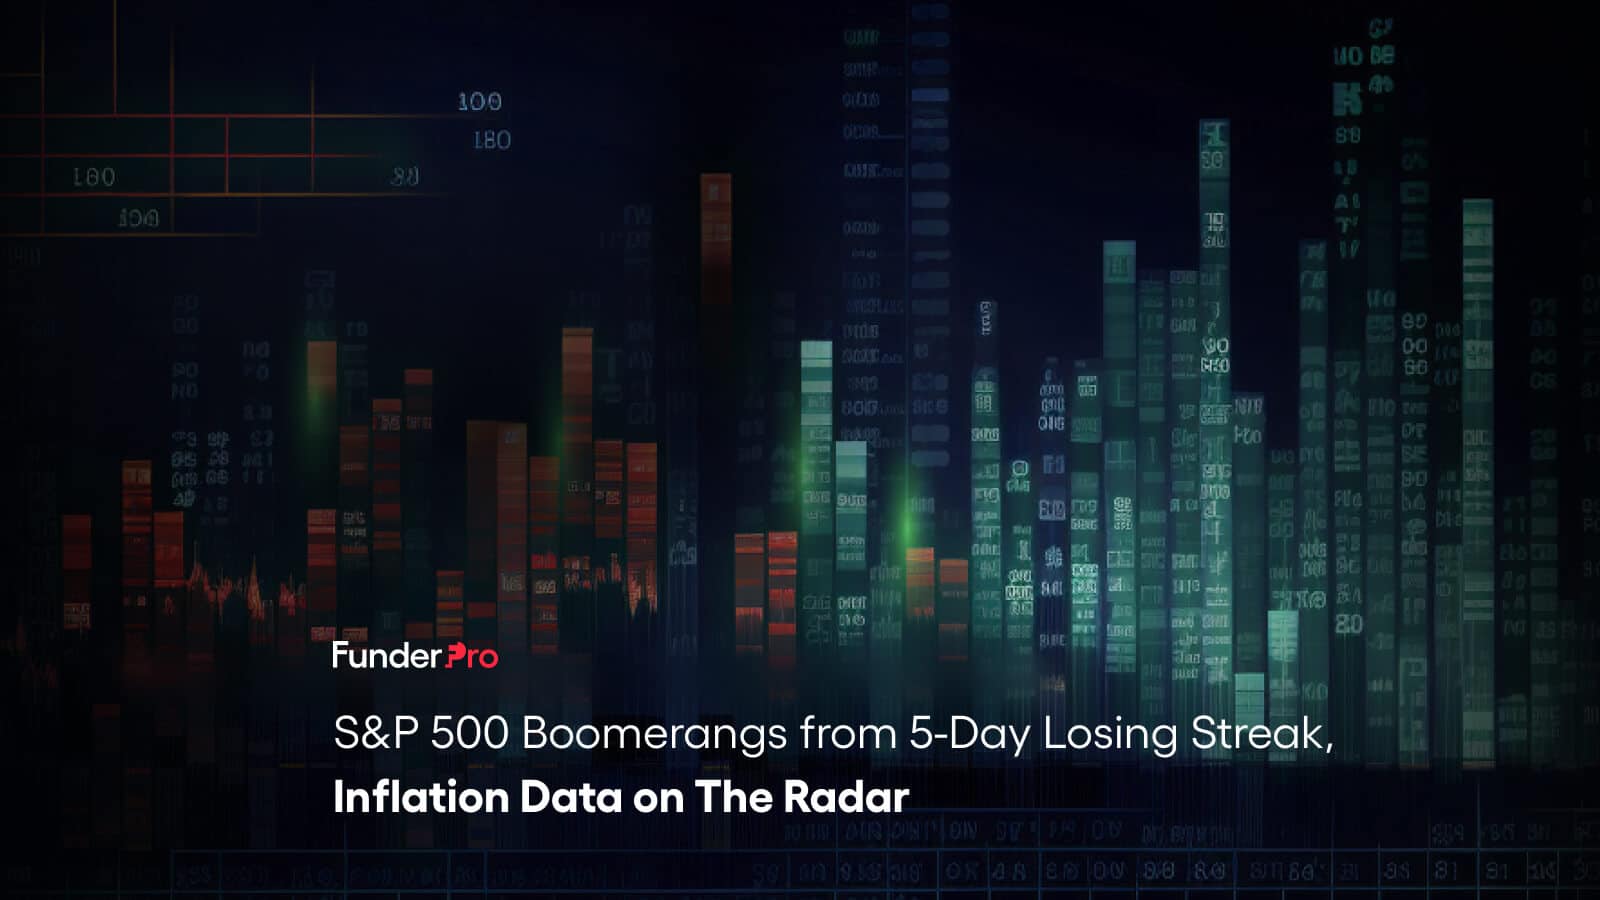 S&P 500 Boomerangs from 5-Day Losing Streak, Inflation Data on The Radar